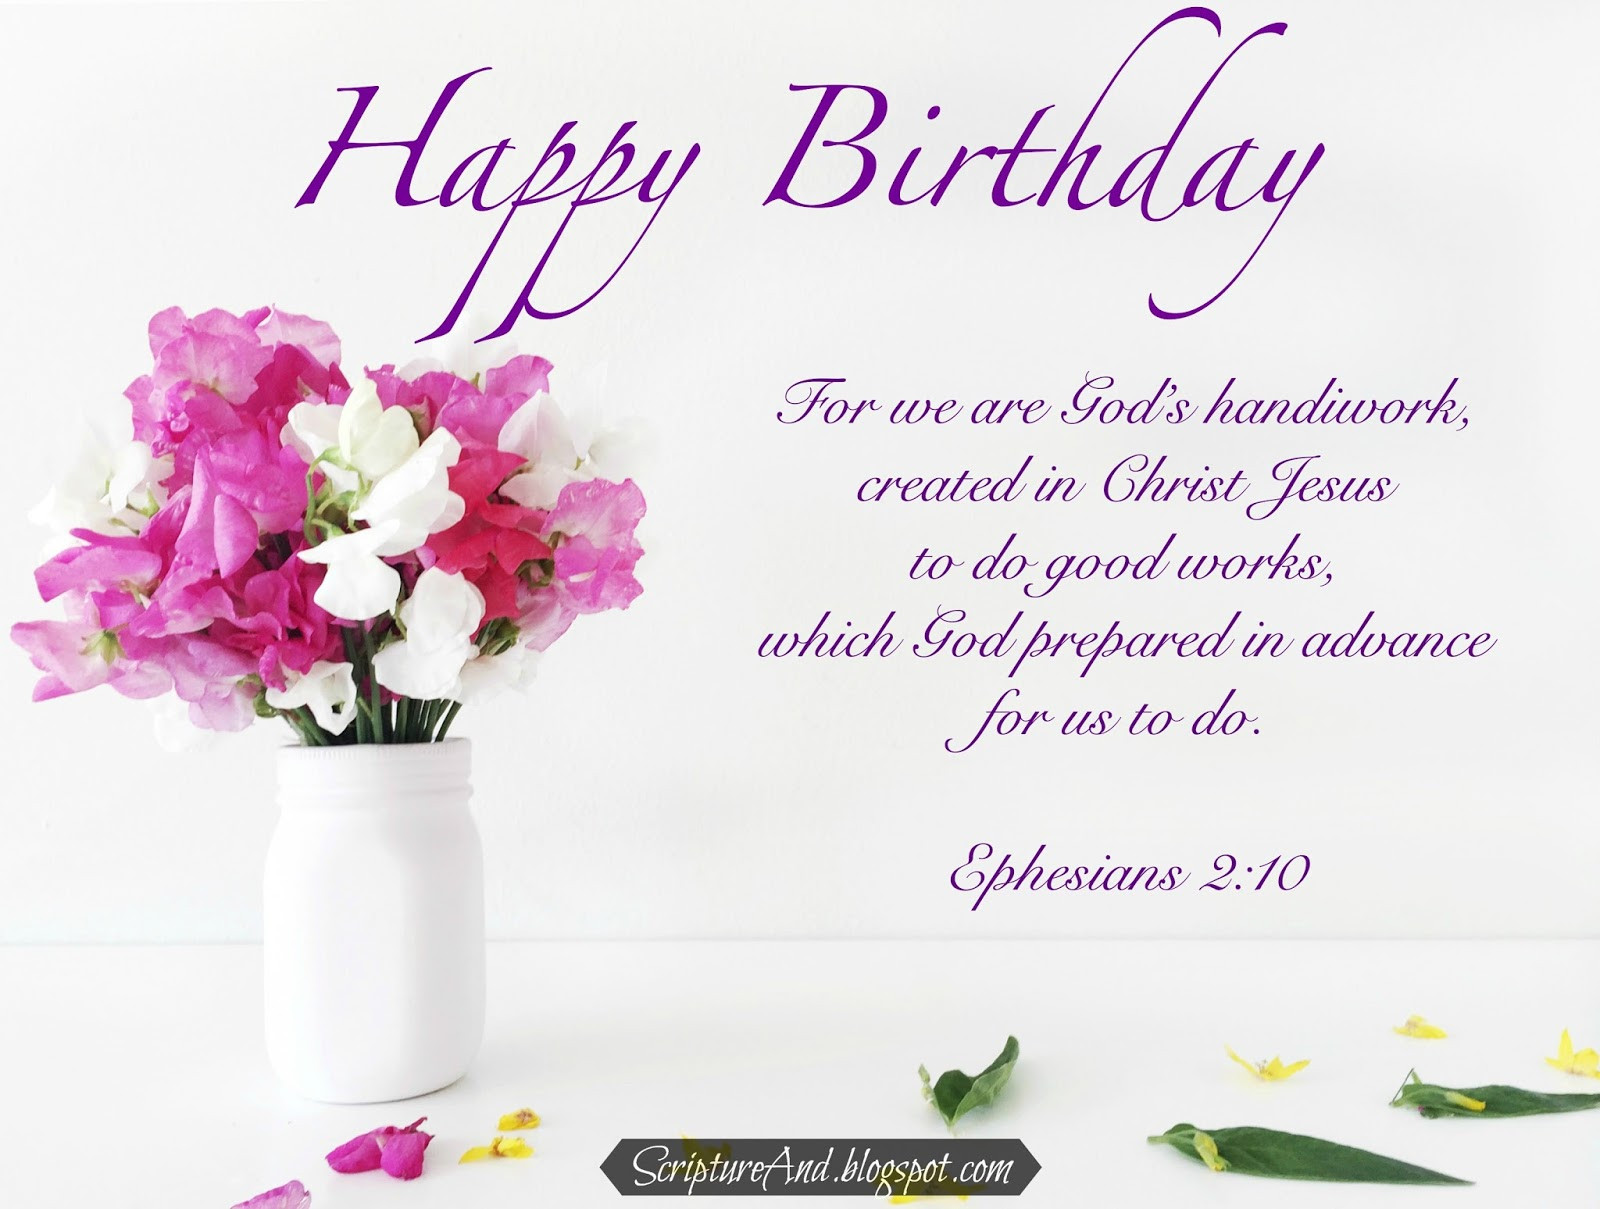 Bible Birthday Quotes
 Scripture and Free Birthday with Bible Verses